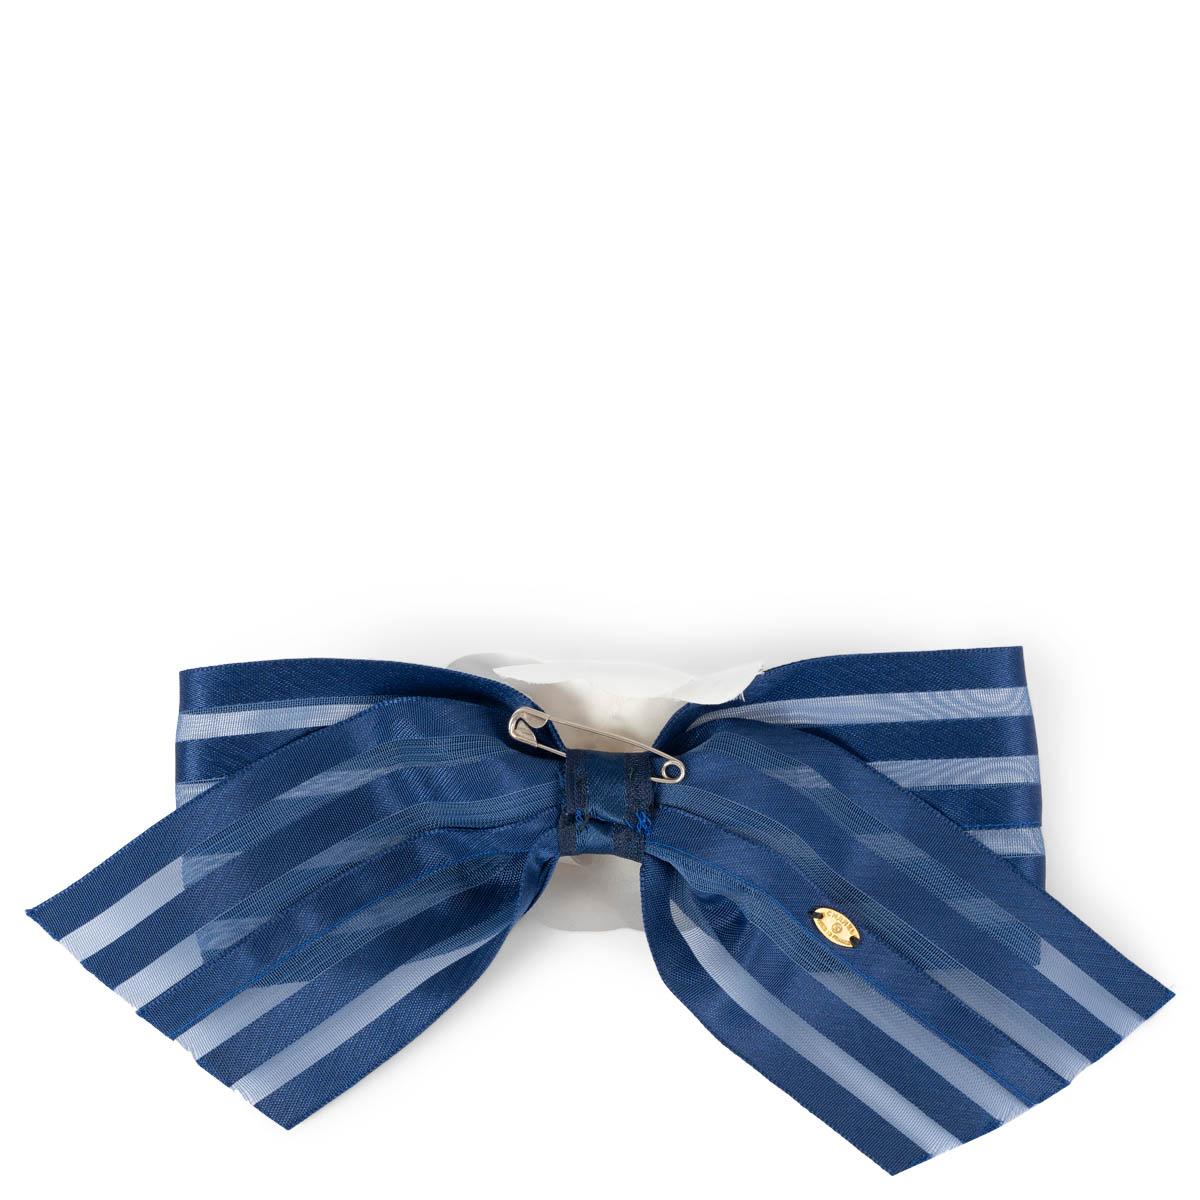 100% authentic Chanel Camellia brooch in white cotton set on a striped navy blue flat silk bow. Has been worn and is in excellent vintage condition. 

Measurements
Width	7cm (2.7in)
Height	18cm (7in)

All our listings include only the listed item